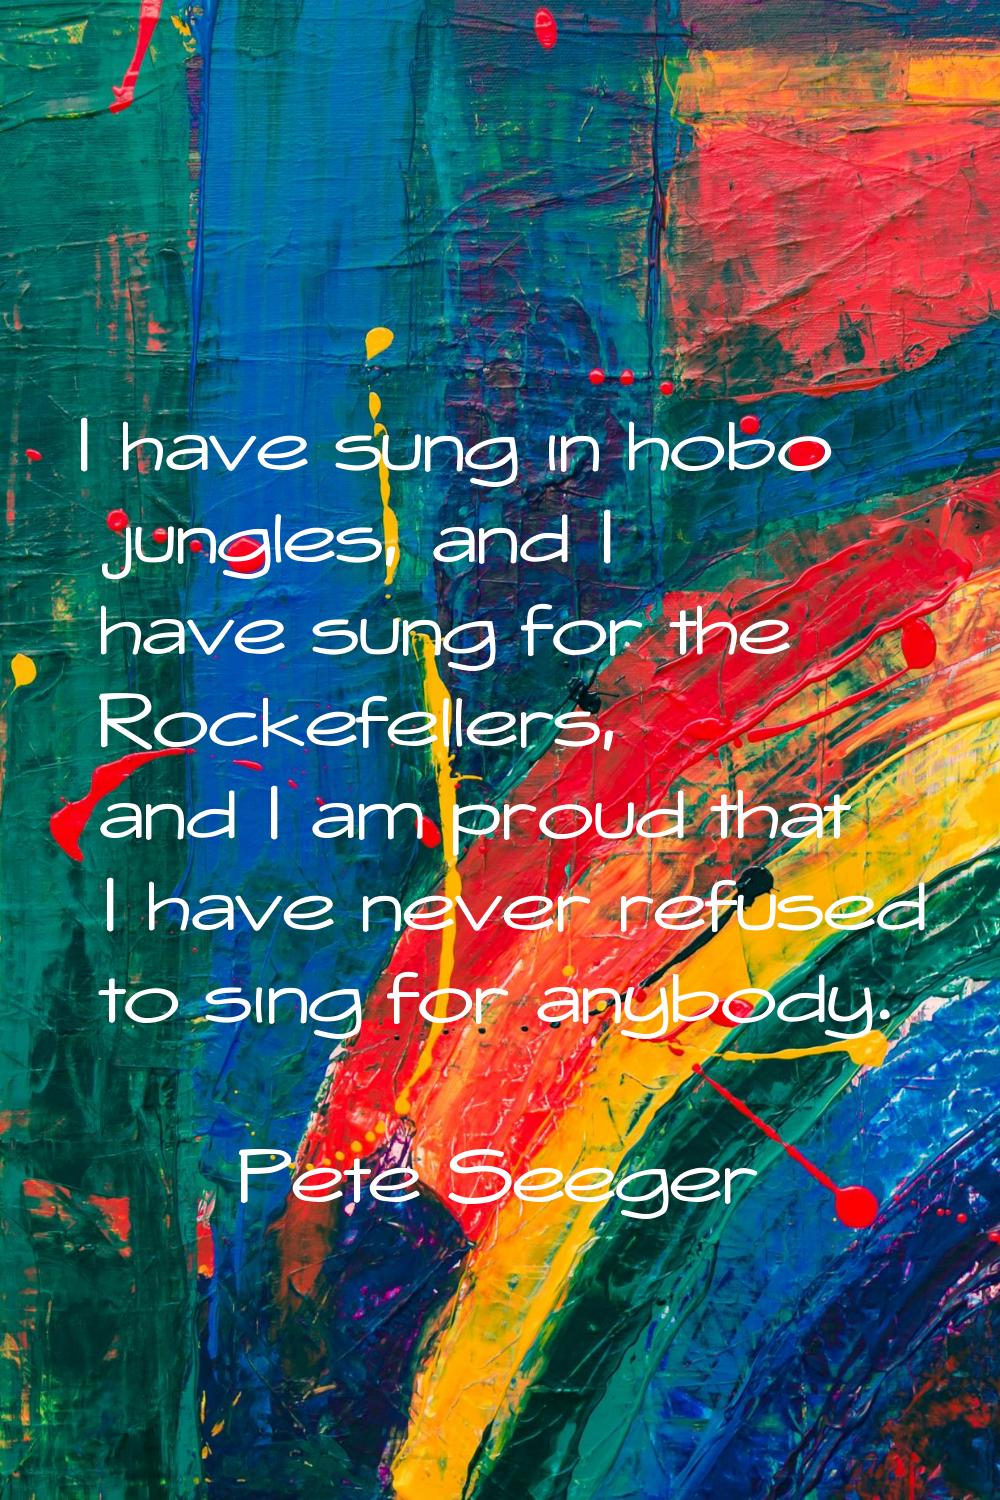 I have sung in hobo jungles, and I have sung for the Rockefellers, and I am proud that I have never